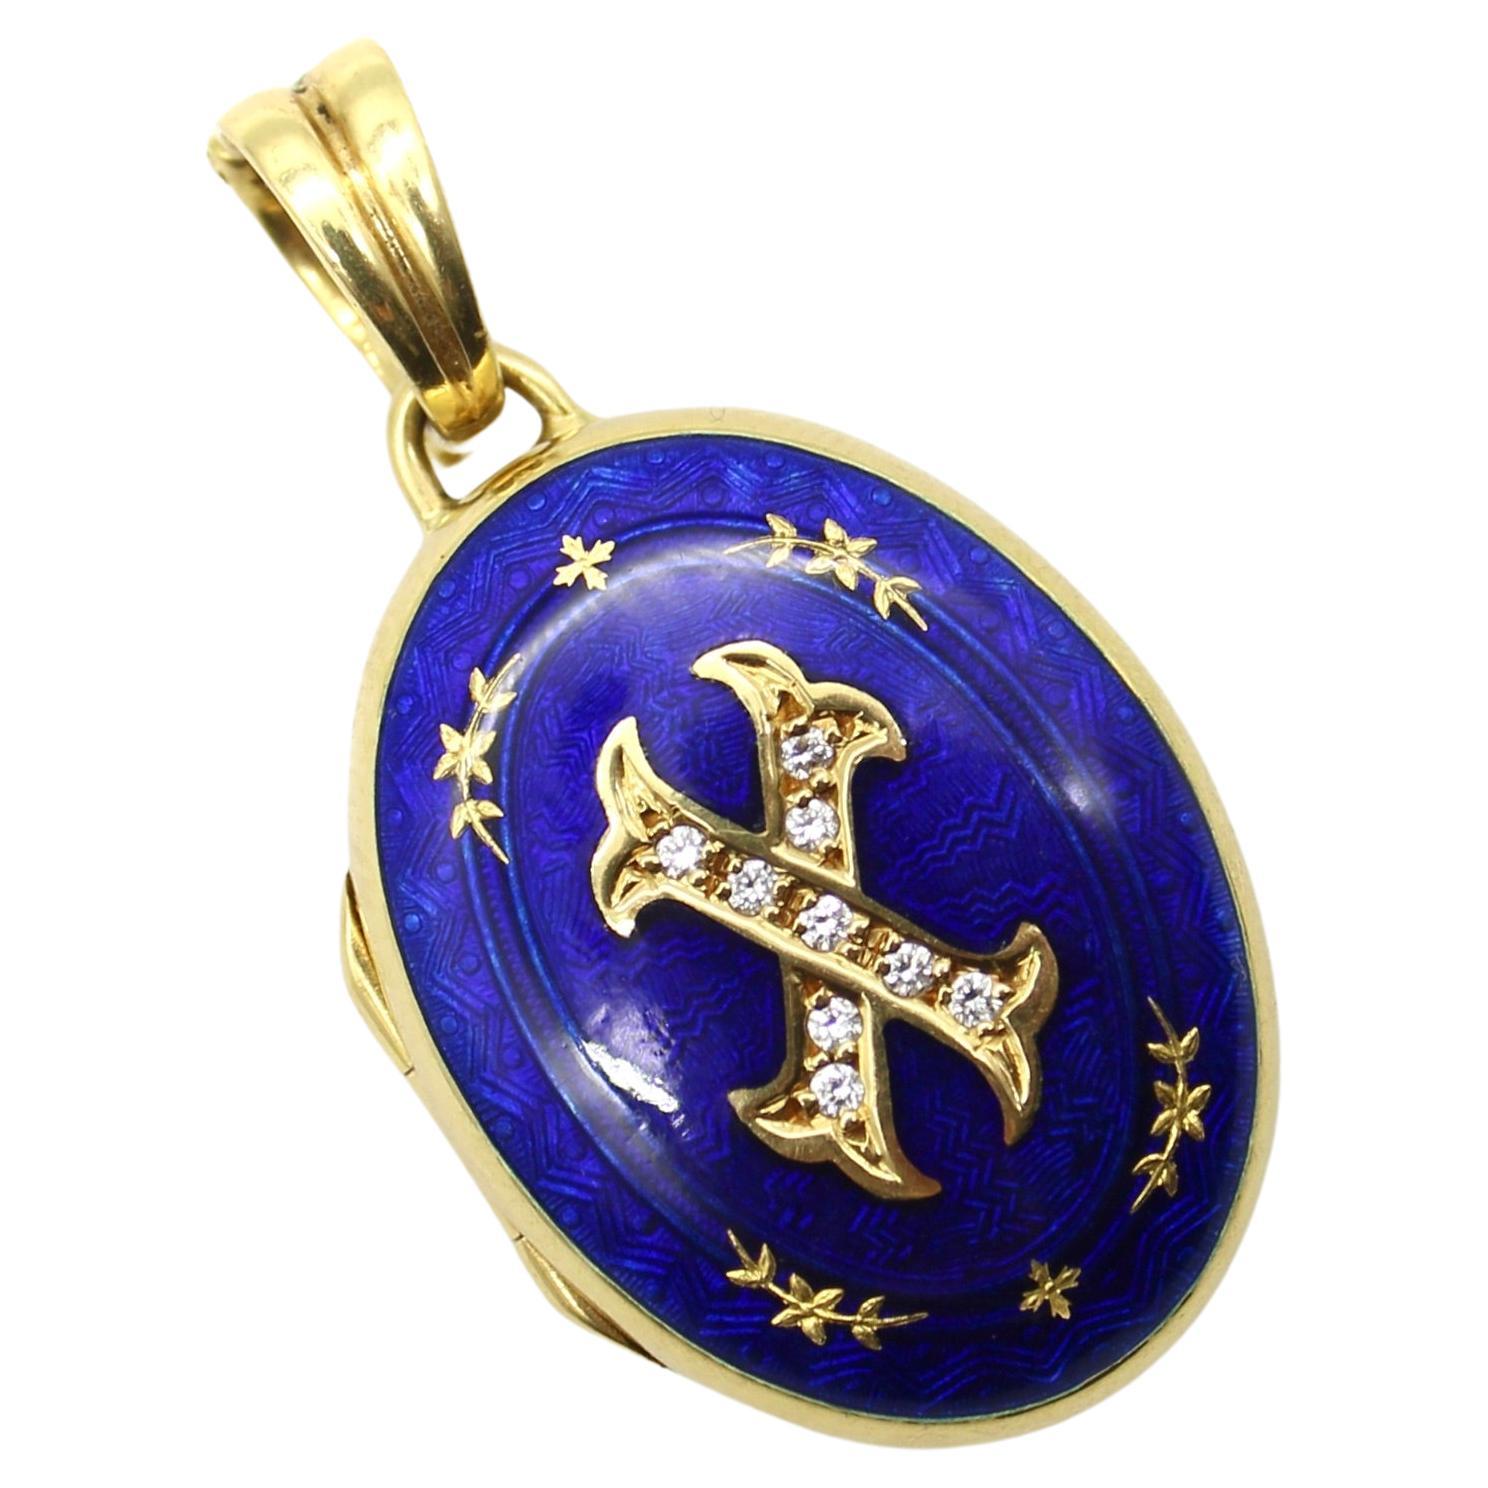 This handmade 18k gold, diamond, and guilloche enamel locket was designed by VICTOR MAYER for Fabergé. The cobalt blue enamel has stunning detail—it is transparent to reveal intricate guilloche engravings beneath it. The engravings feature a chevron